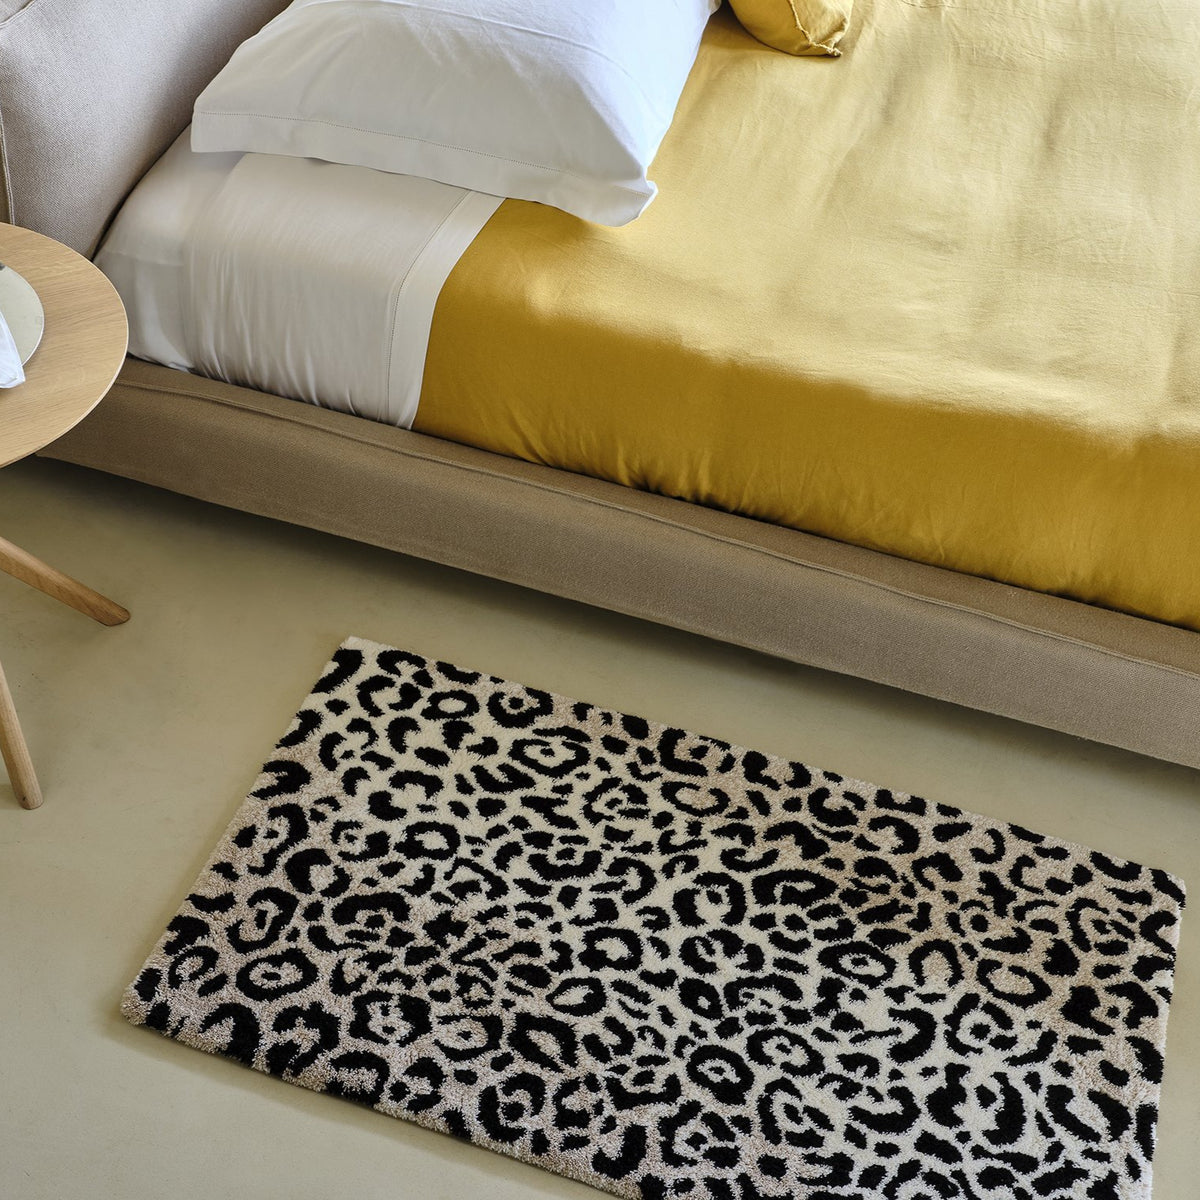 Abyss Habidecor Leopard Bath and Area Rugs Lifestyle 2 Fine Linens